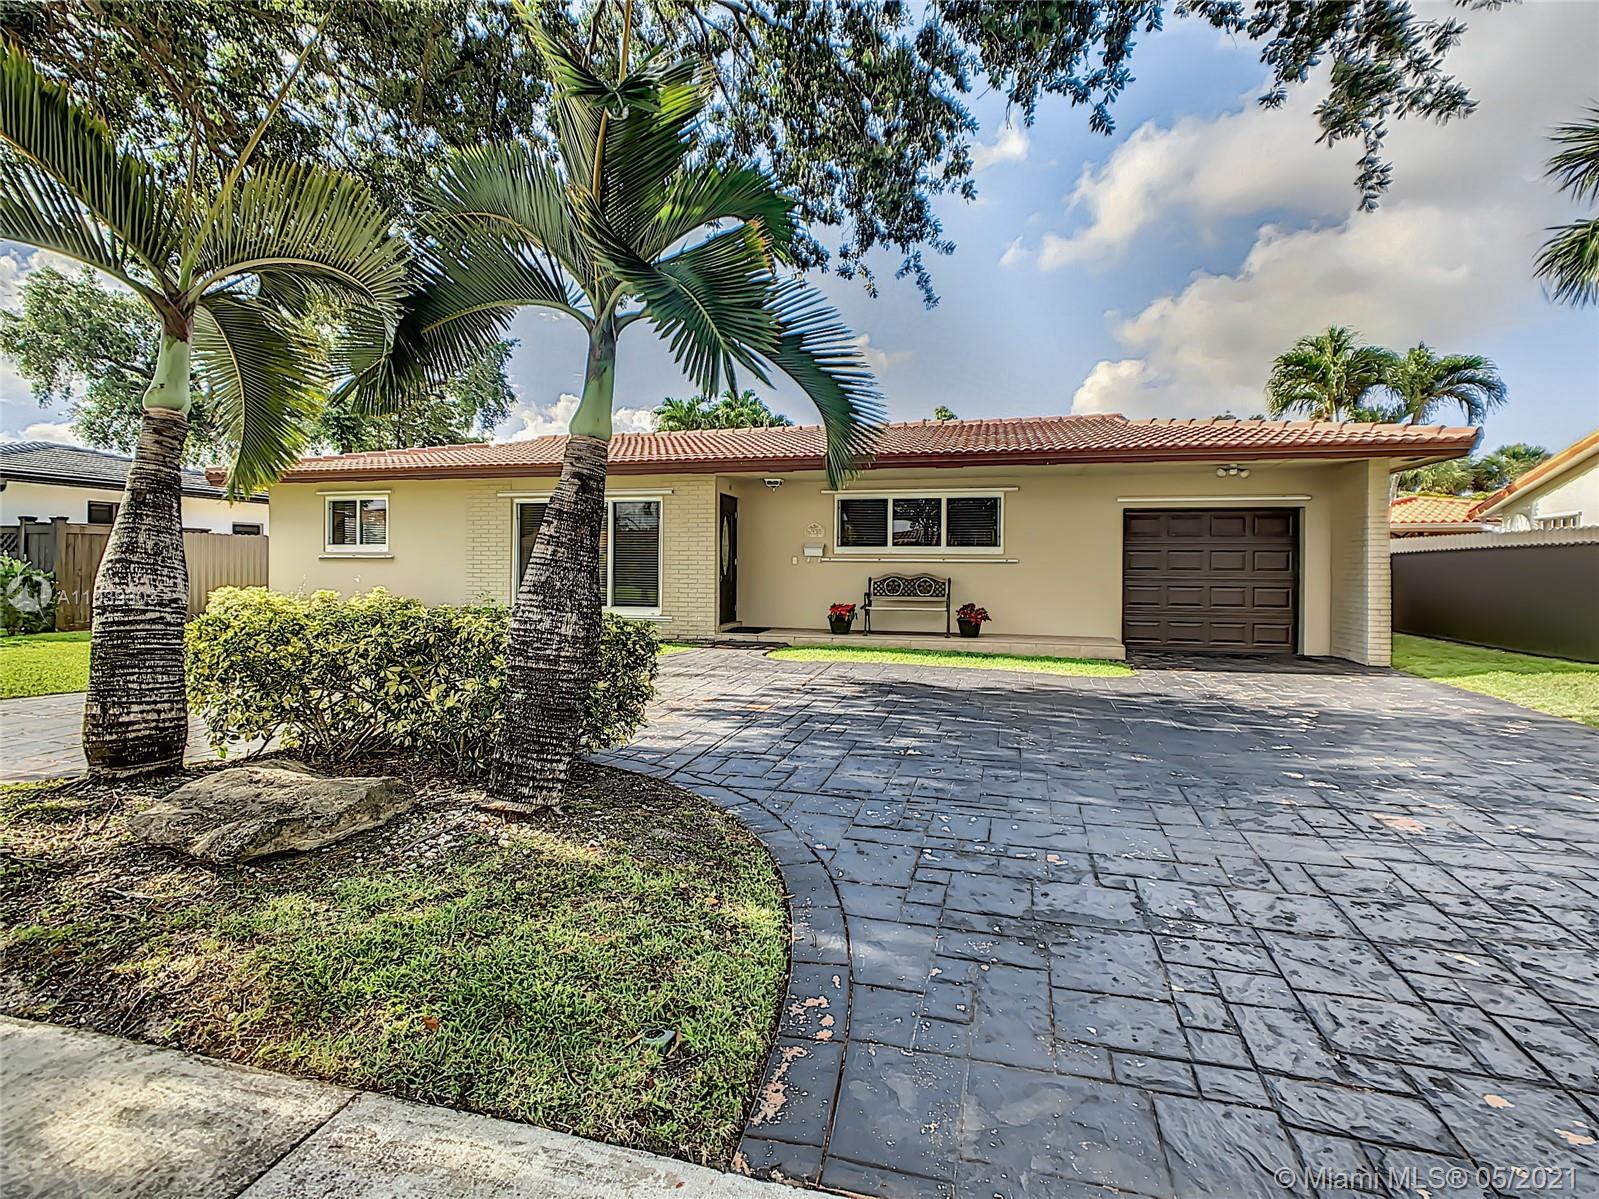 Photo 1 of 6930 Bamboo St in Miami Lakes - MLS A11039303